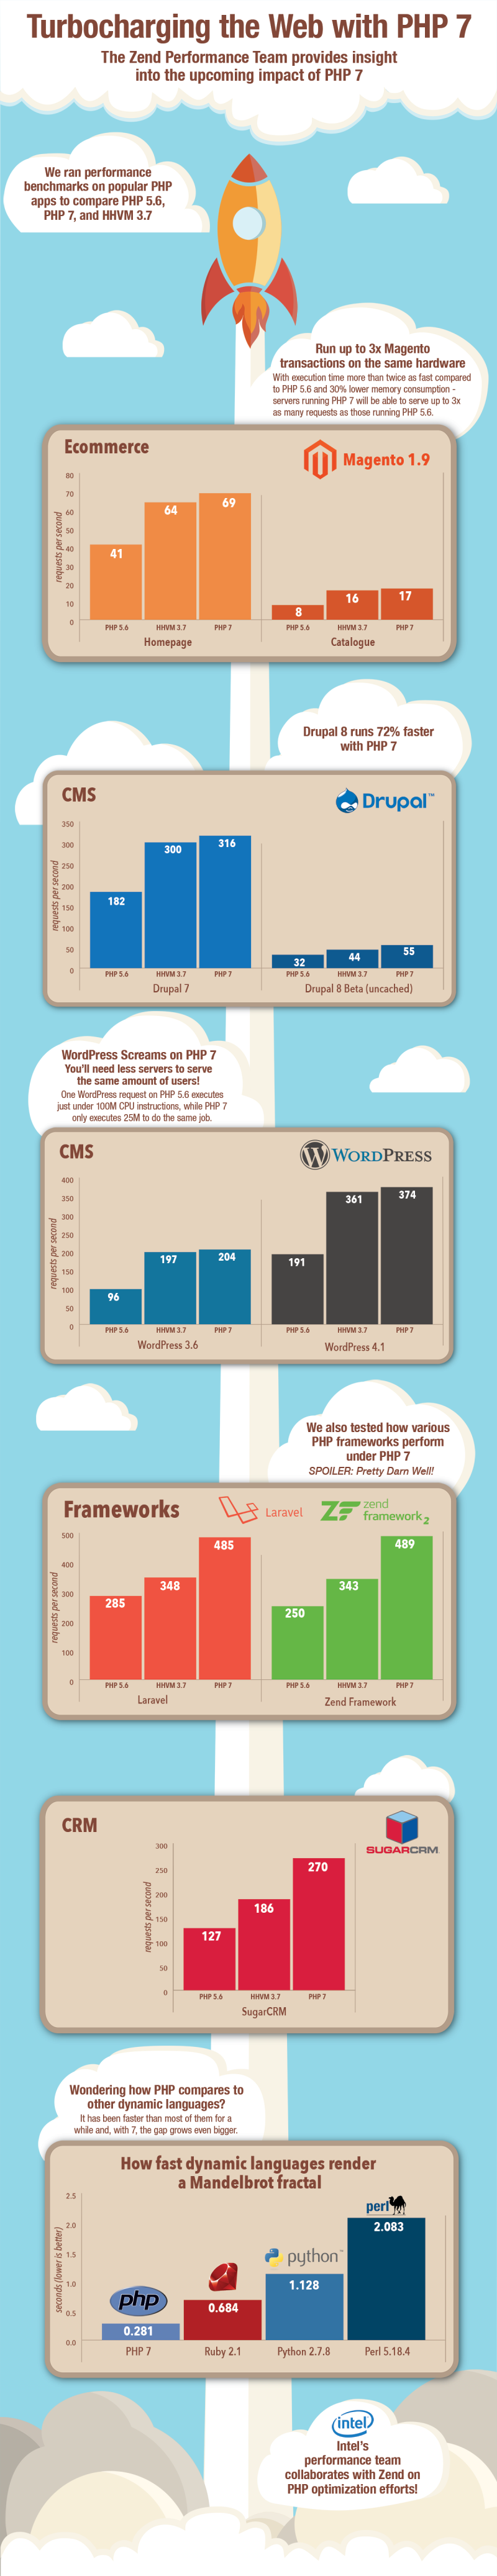 Impact-of-PHP-7-by-Zend-Performance-Team[1]